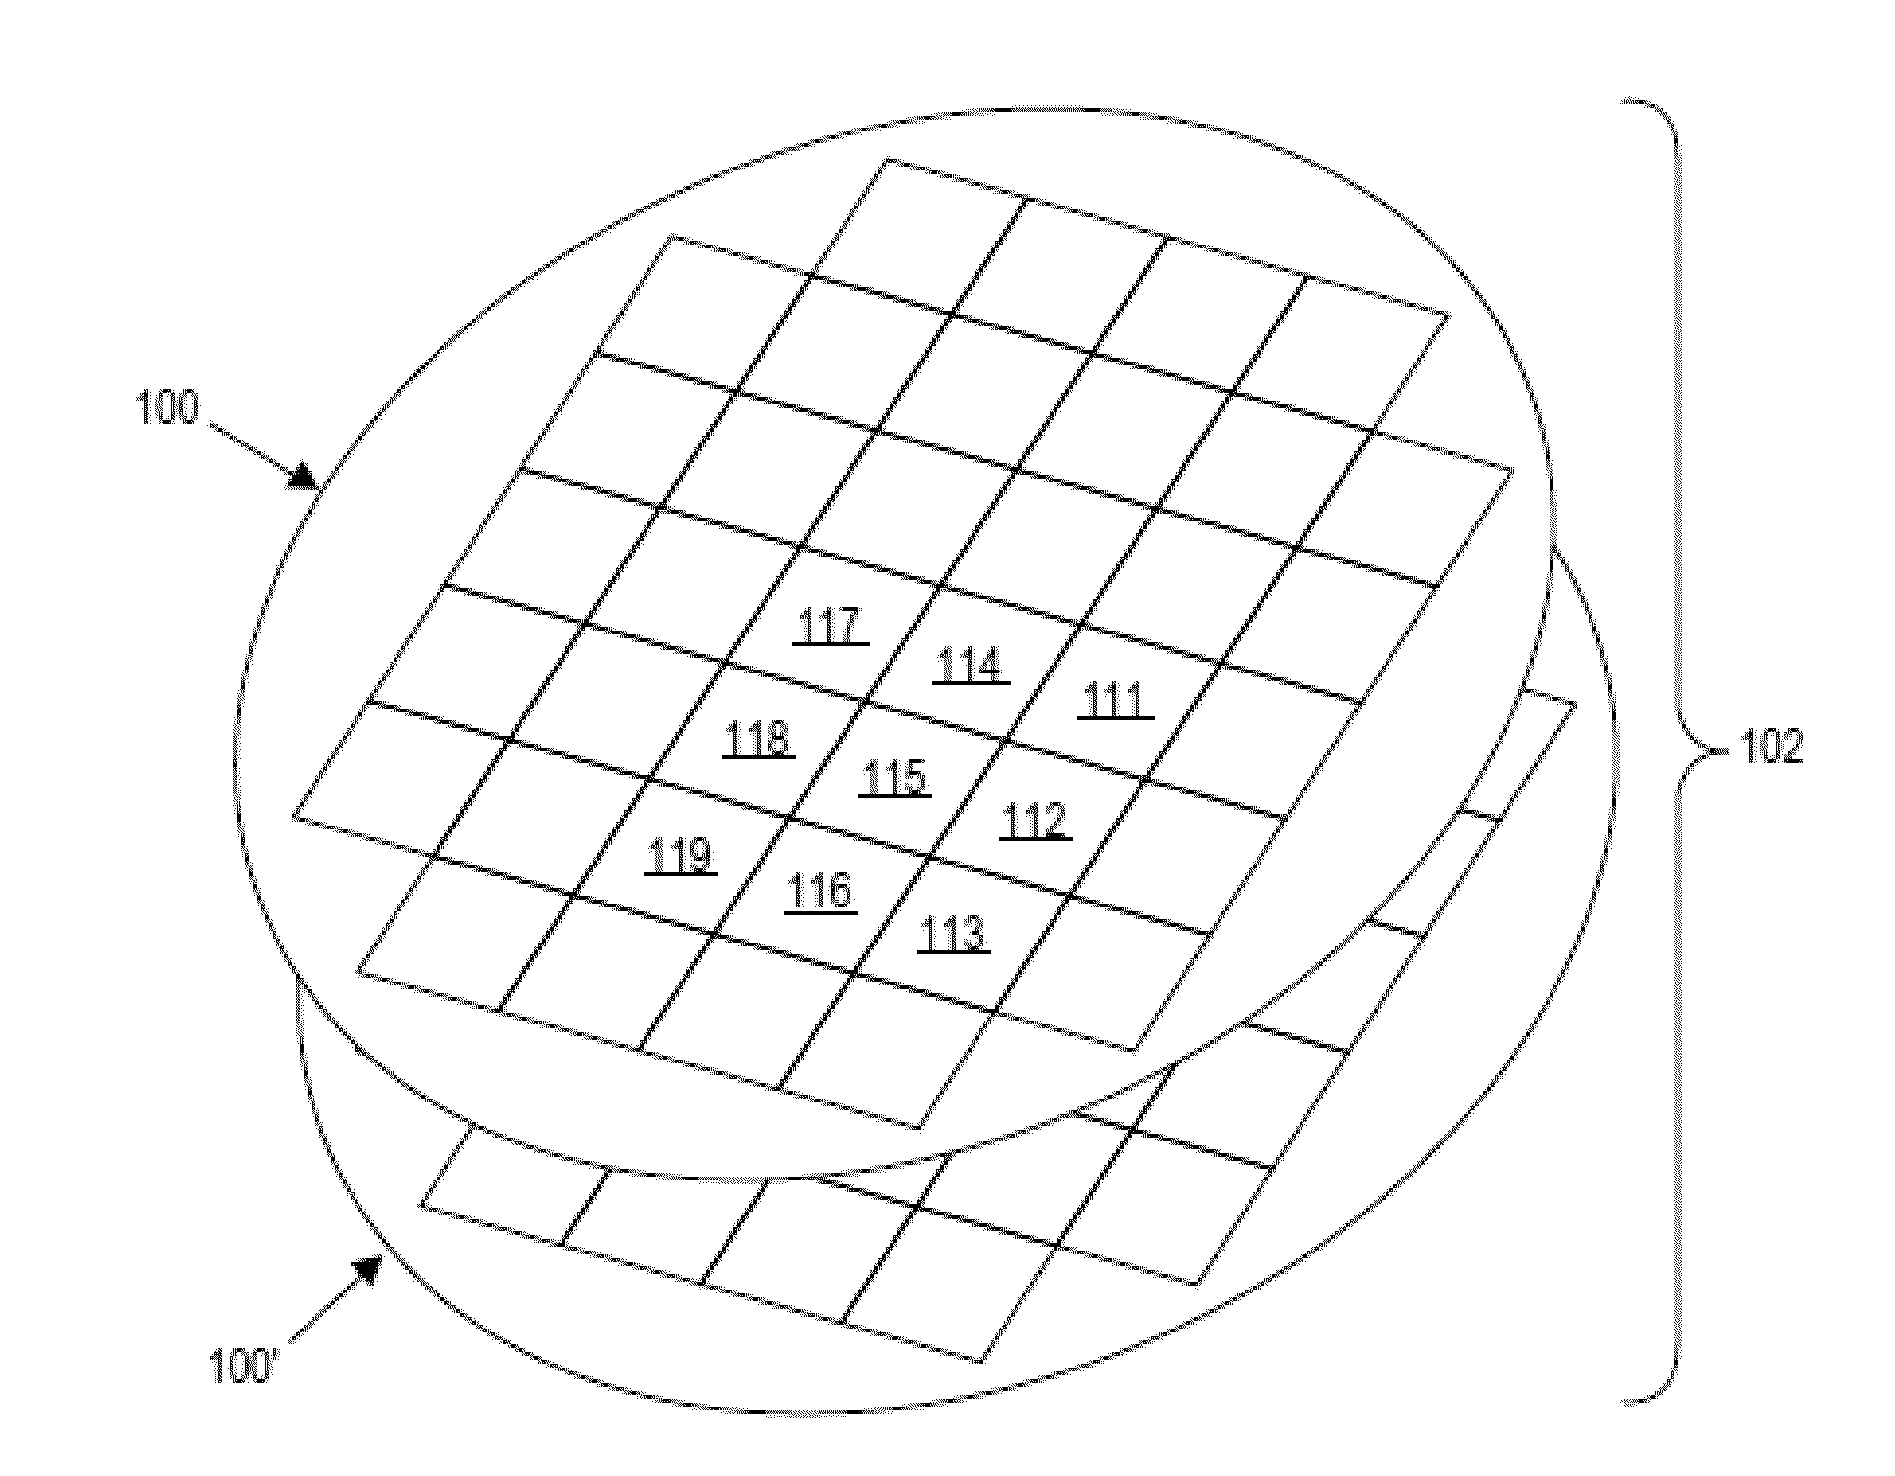 Die seal ring for integrated circuit system with stacked device wafers